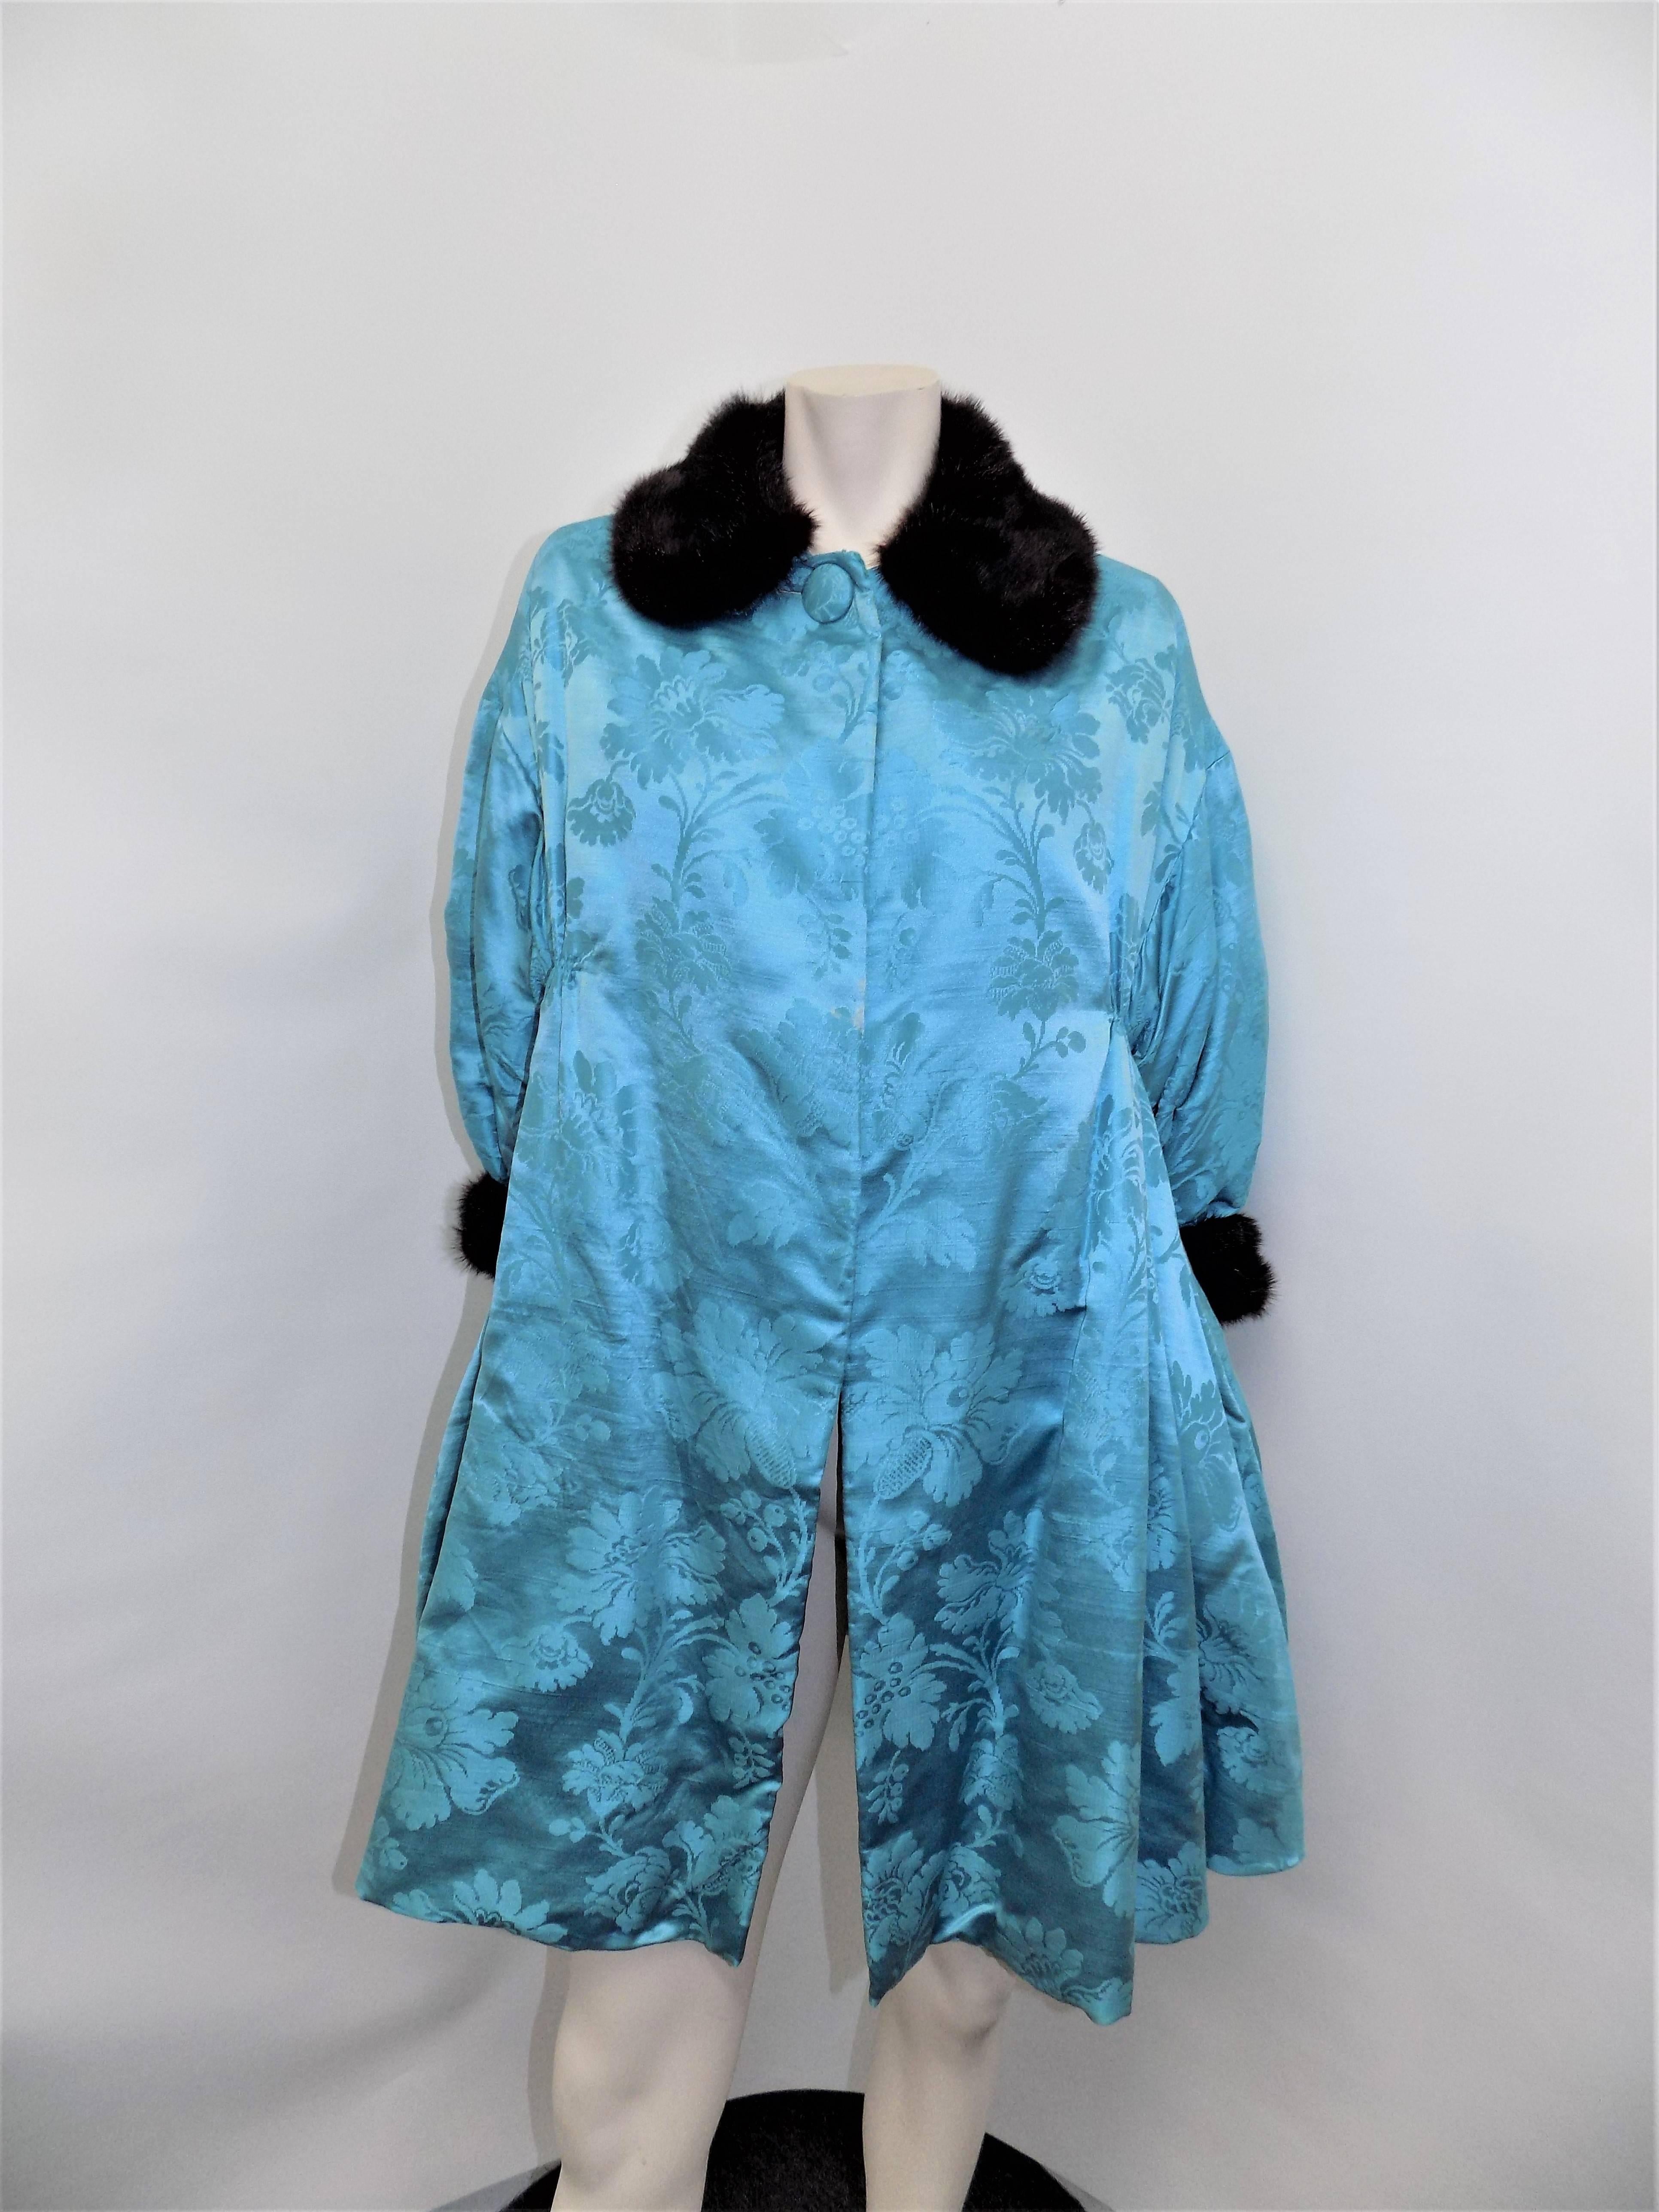 Spectacular late 1950's  silk turquoise blue brocade coat by Jeanne Lanvin house. Designed by than very talented  Antonio Castillo. 
Castillo, together with Pierre Balmain, Cristóbal Balenciaga, and Christian Dior, was considered one of the most